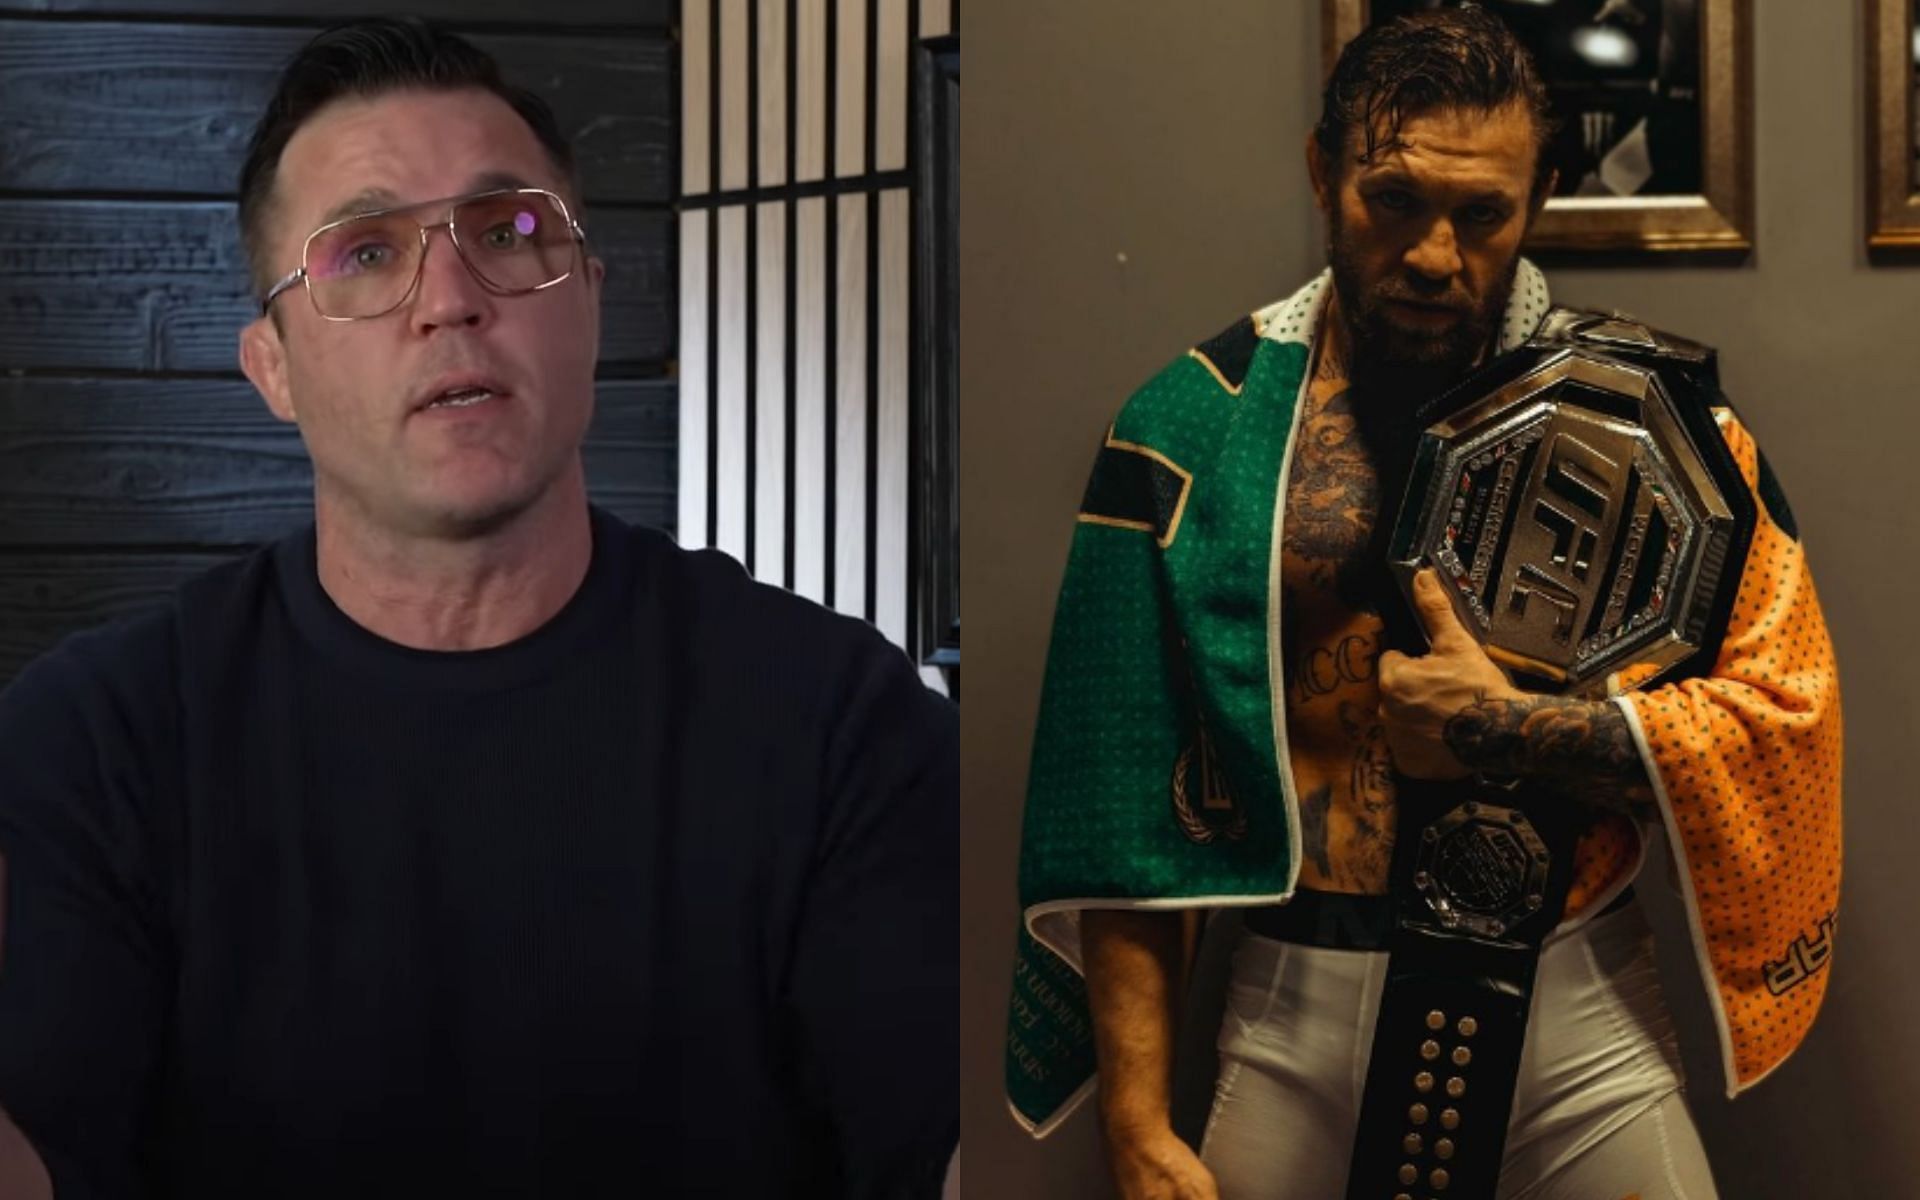 Chael Sonnen (left) is confused by the ambiguity surrounding Conor McGregor